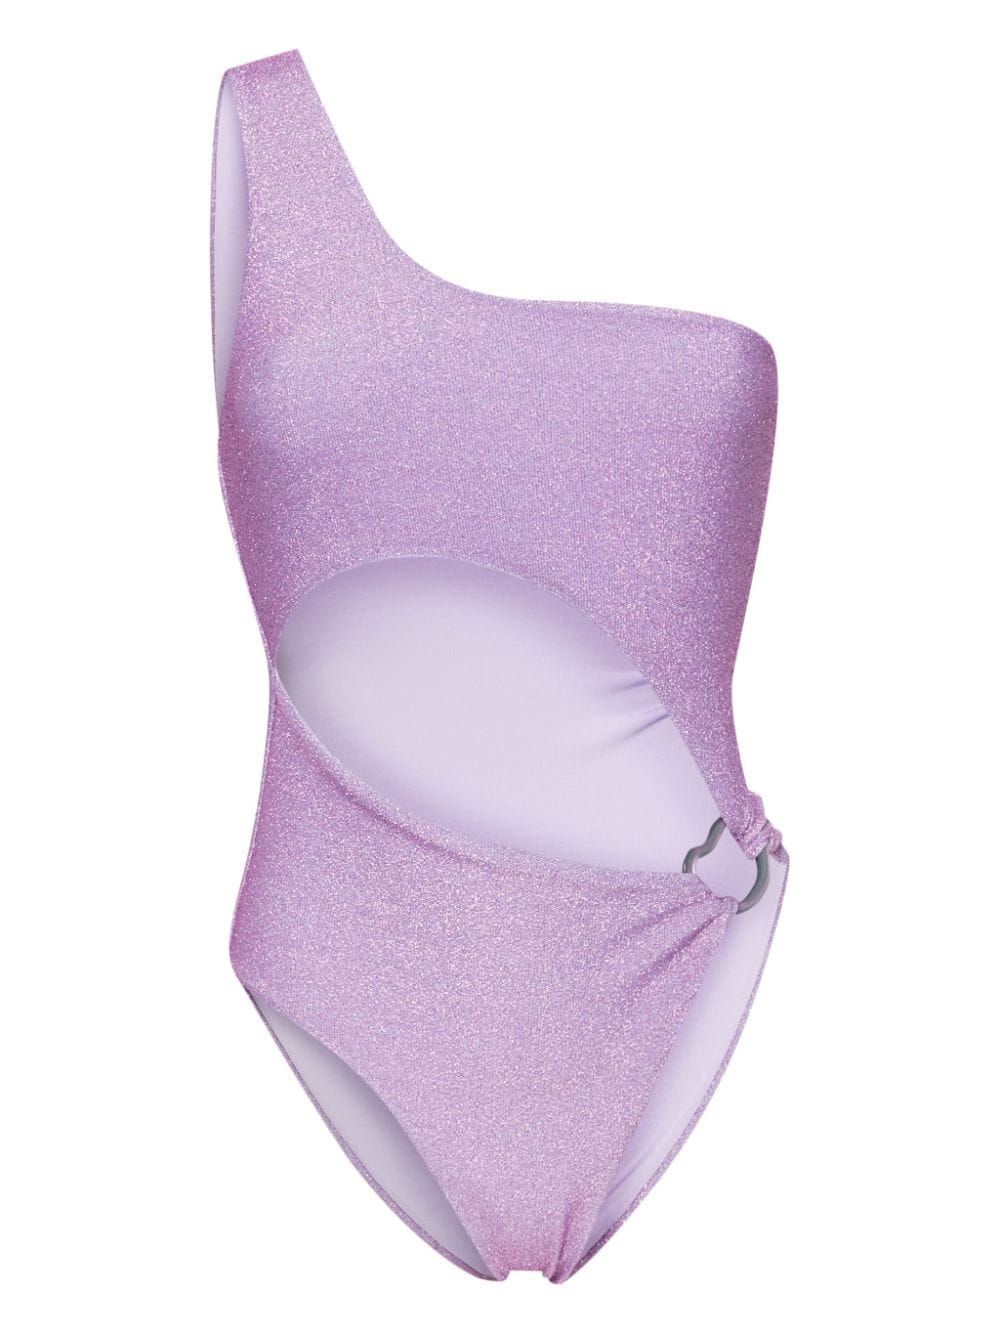 Baobab Collection Kika cut-out swimsuit - Violett von Baobab Collection